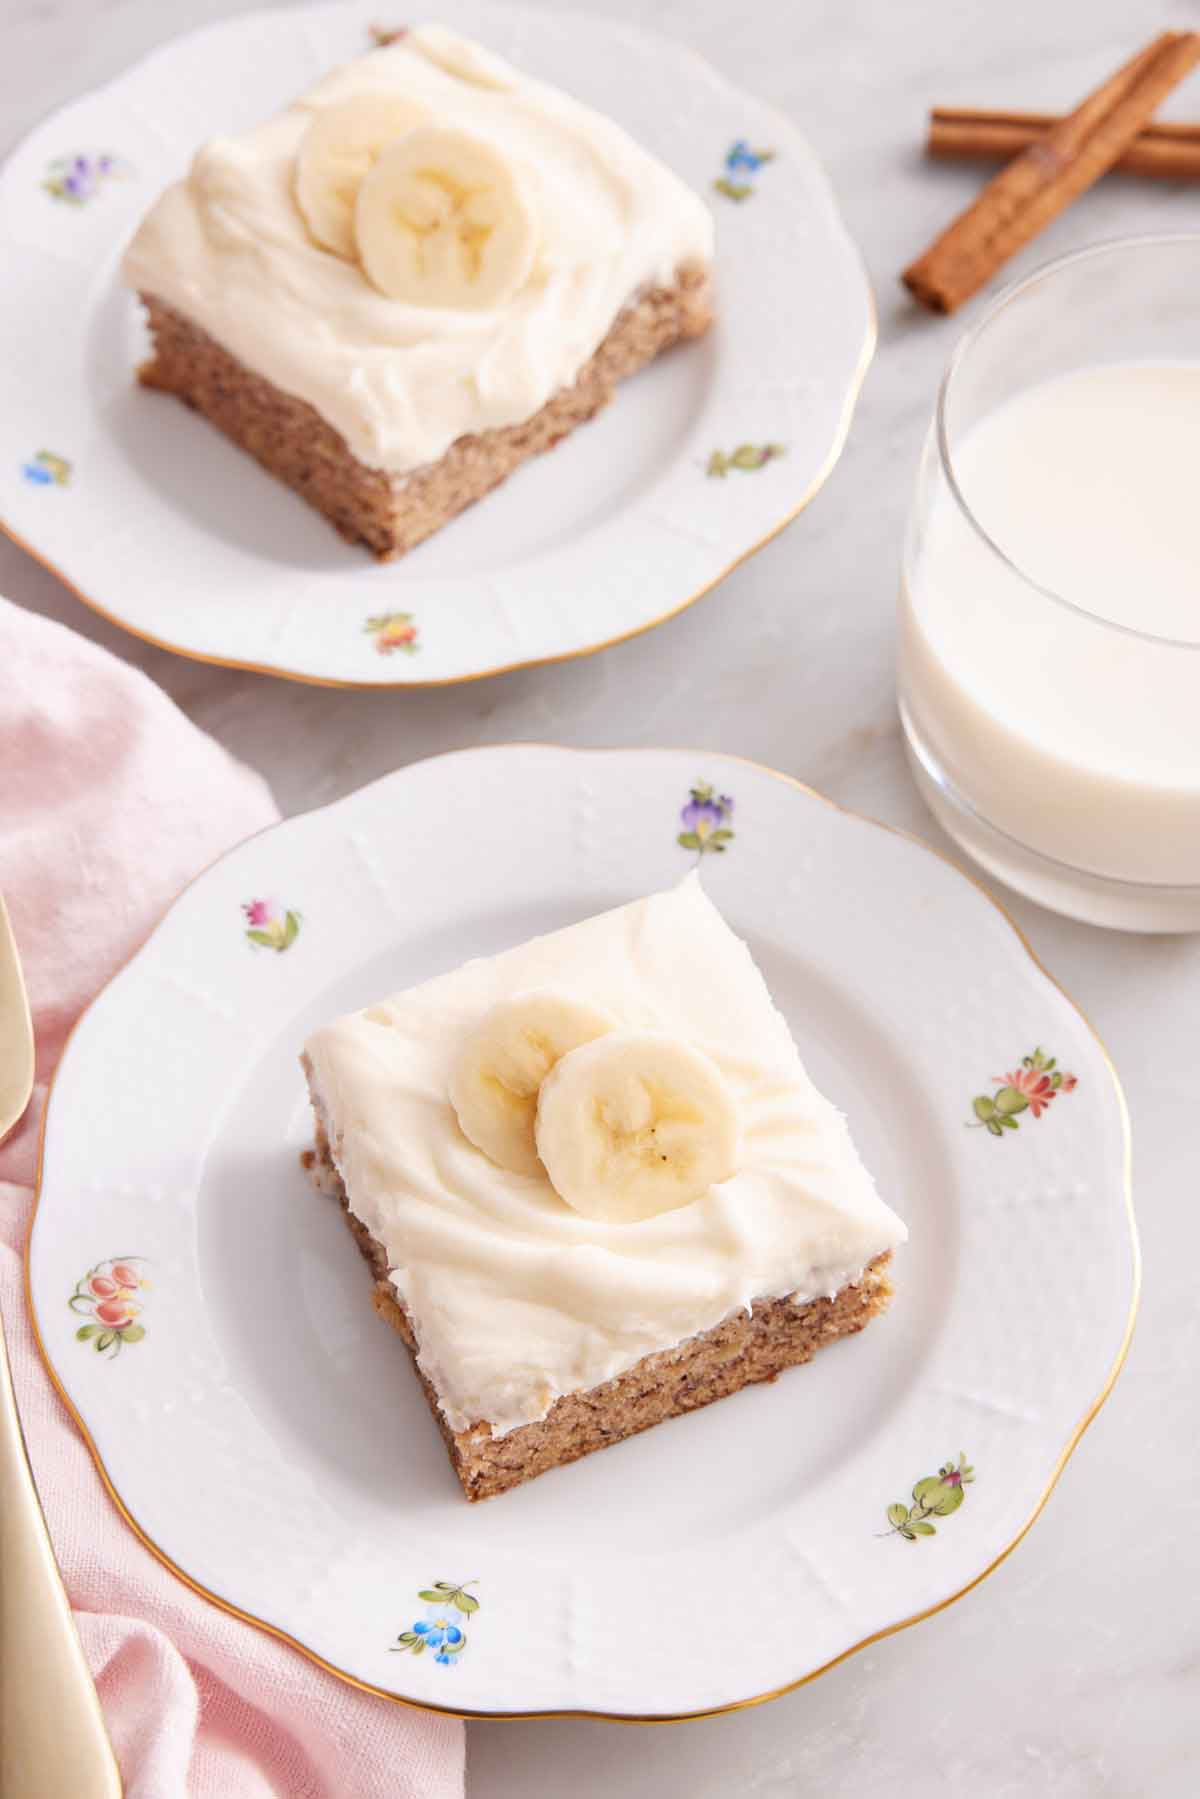 Two plates of banana bars with sliced bananas on top. Glass of milk to the side.